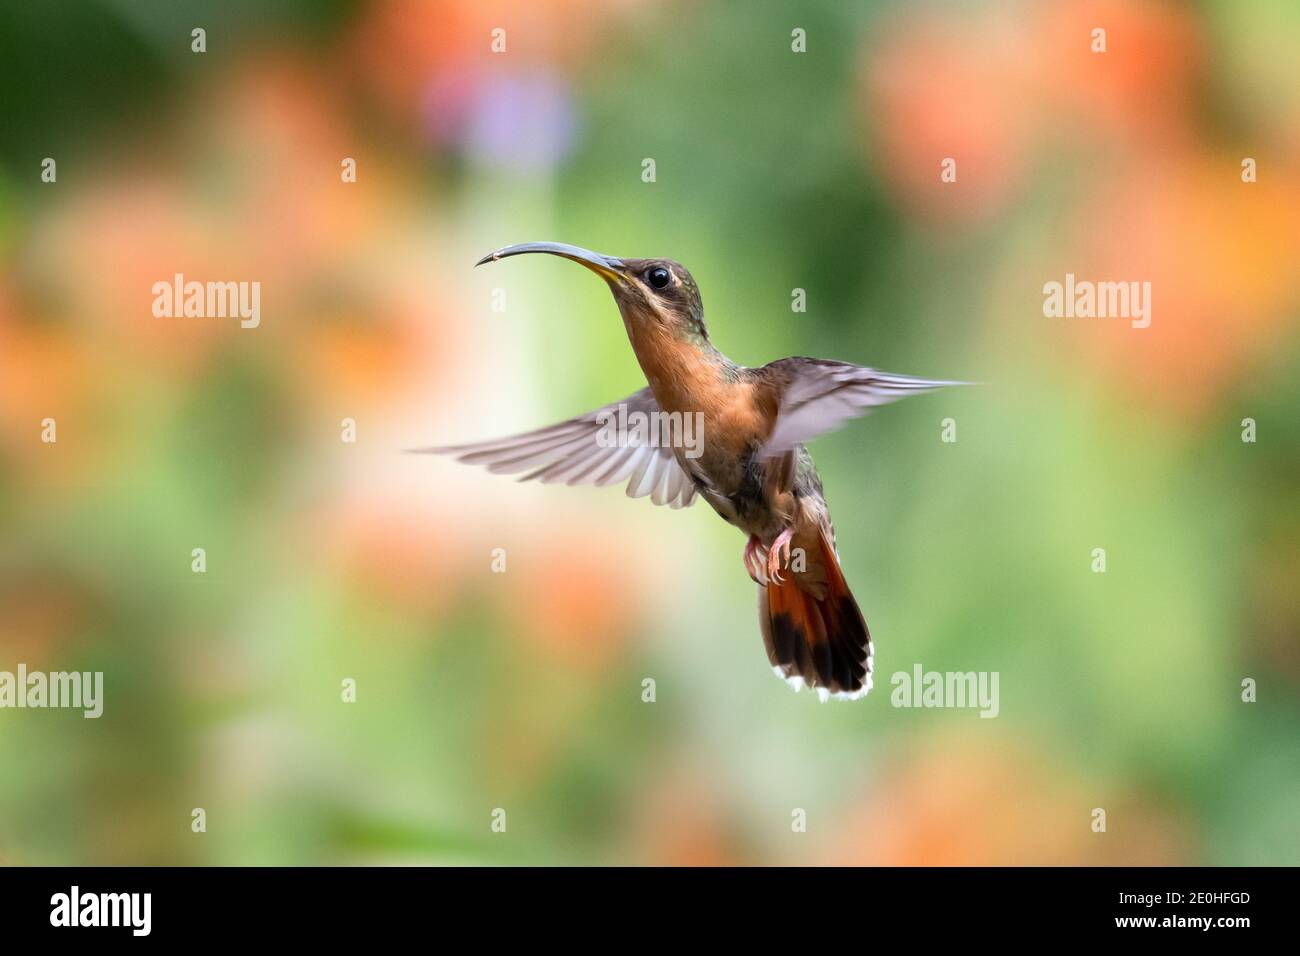 A Rufous-breasted Hermit hummingbird hovering in the air with orange flowers blurred in the background. Bird in flight. Wildlife in nature Stock Photo